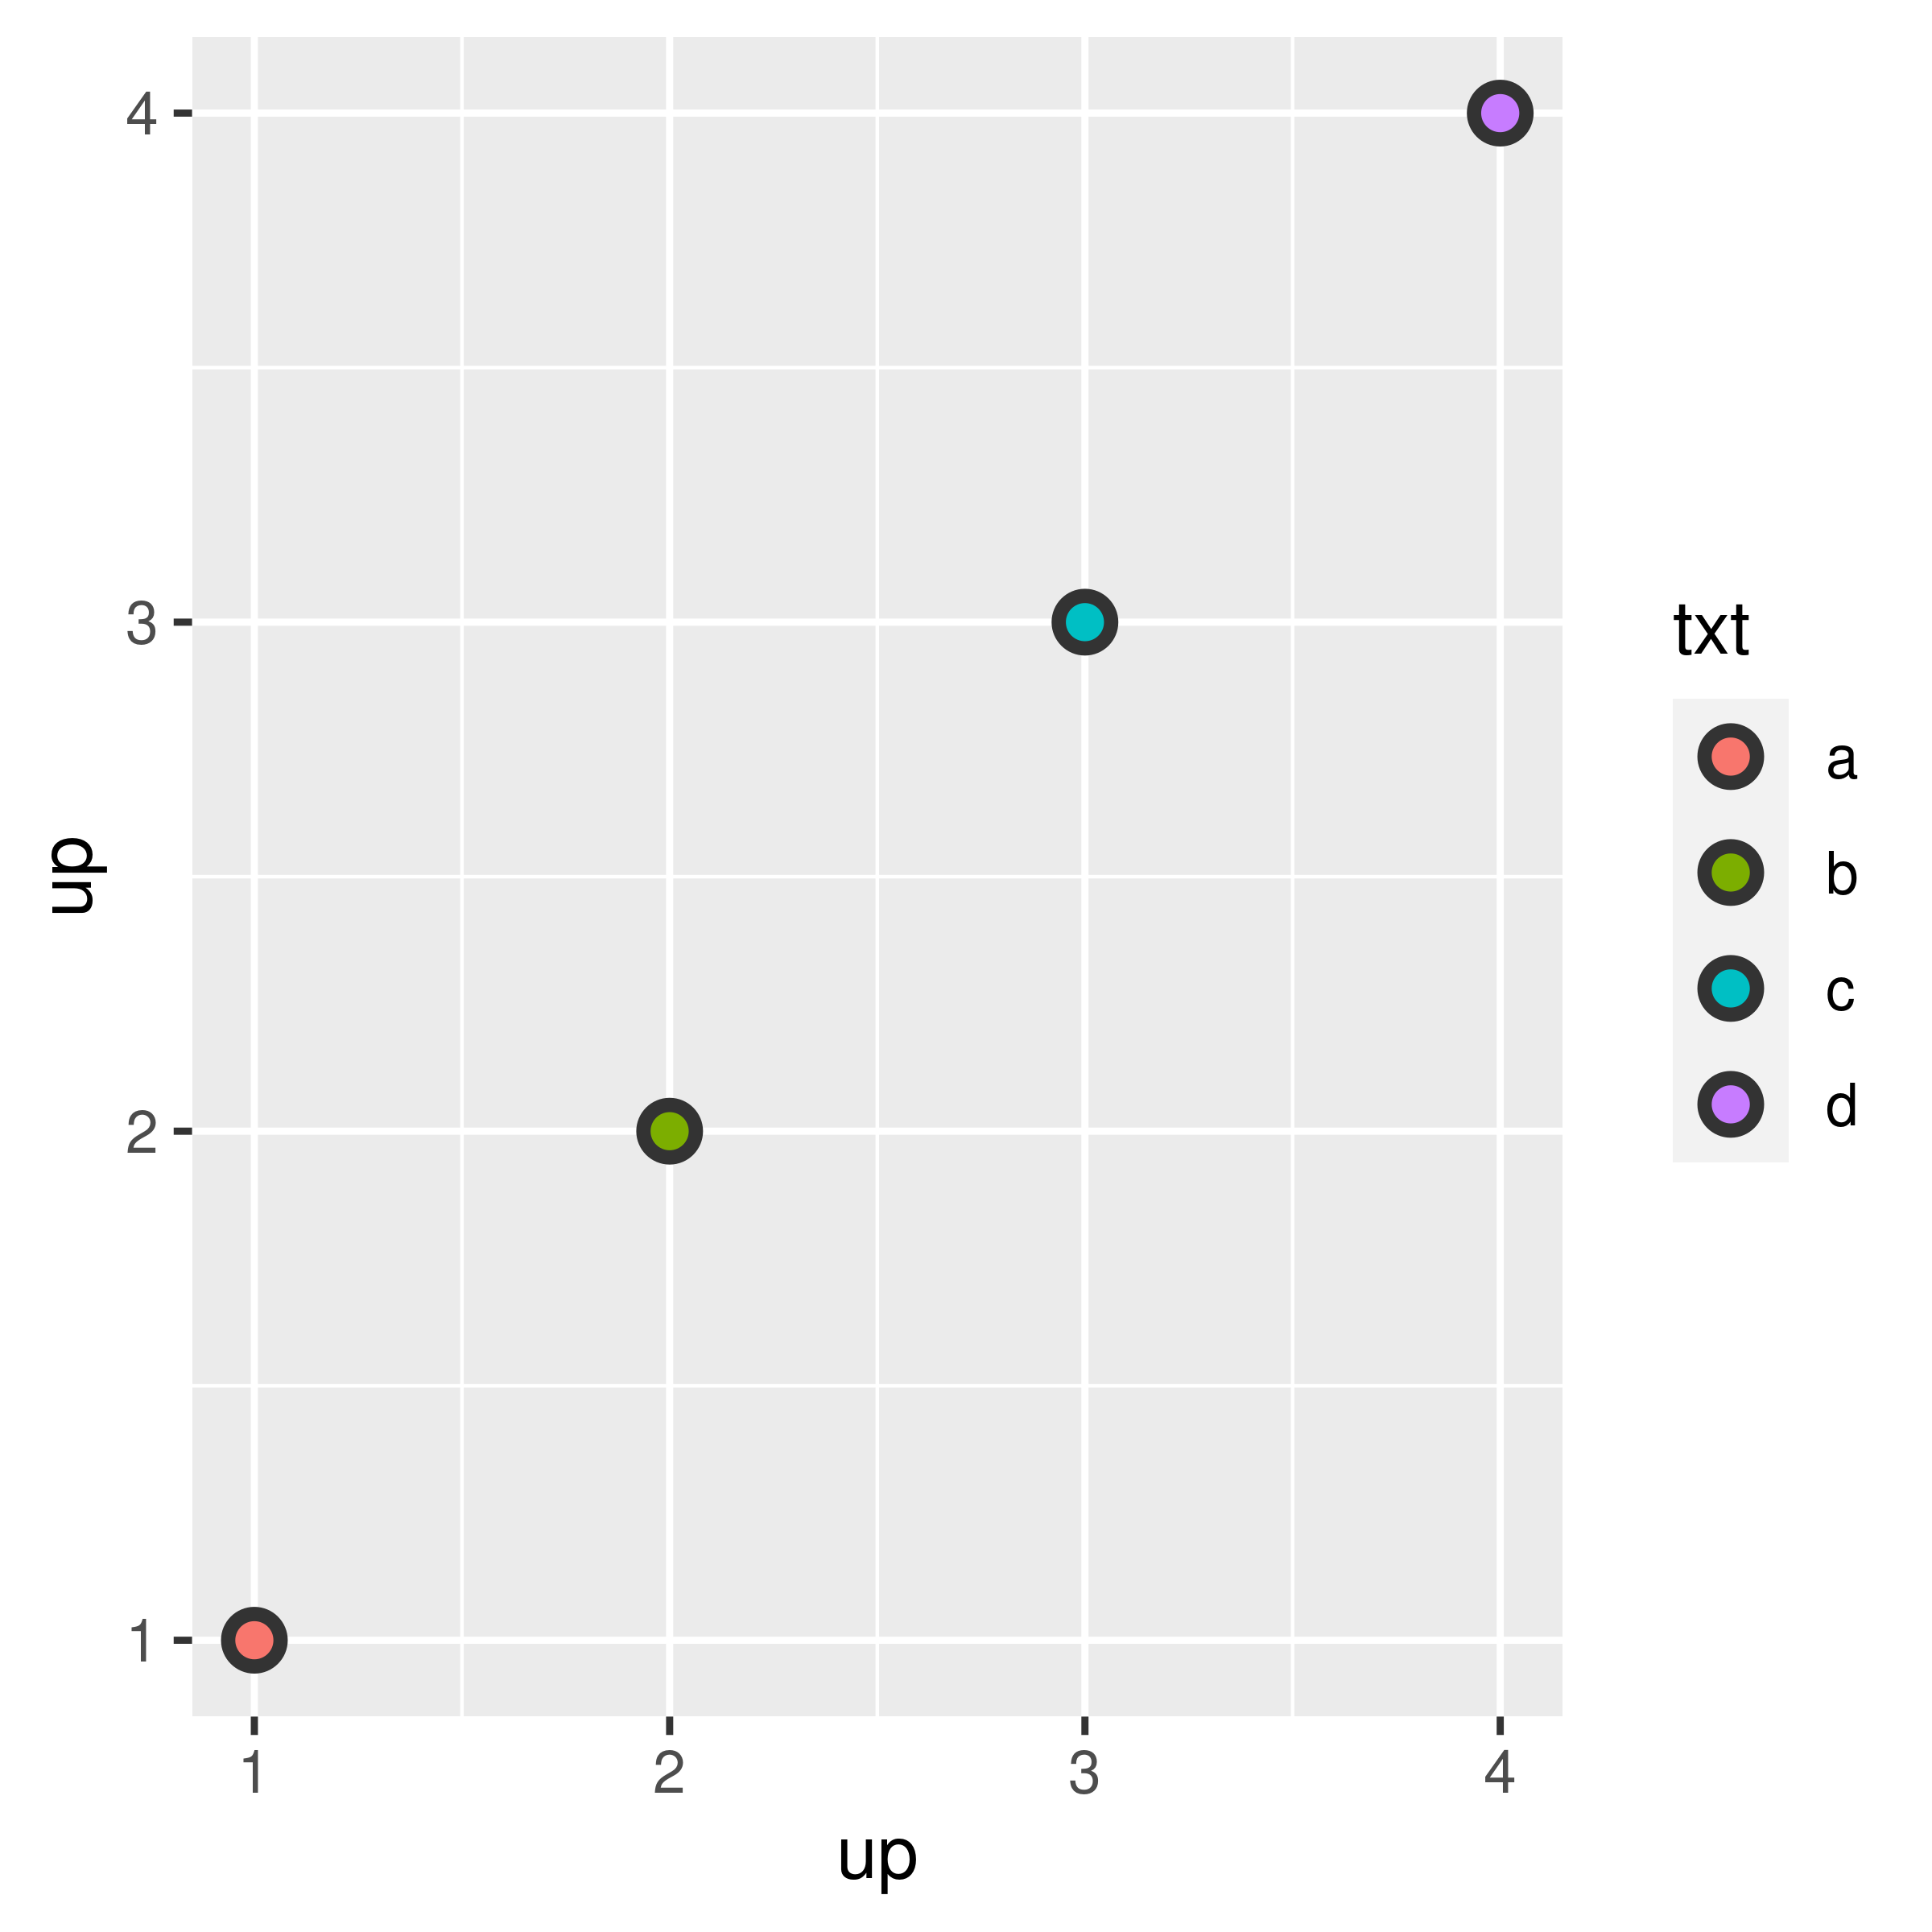 ggplot2: Elegant Graphics for Data Analysis (3e) - 11 Colour scales and  legends